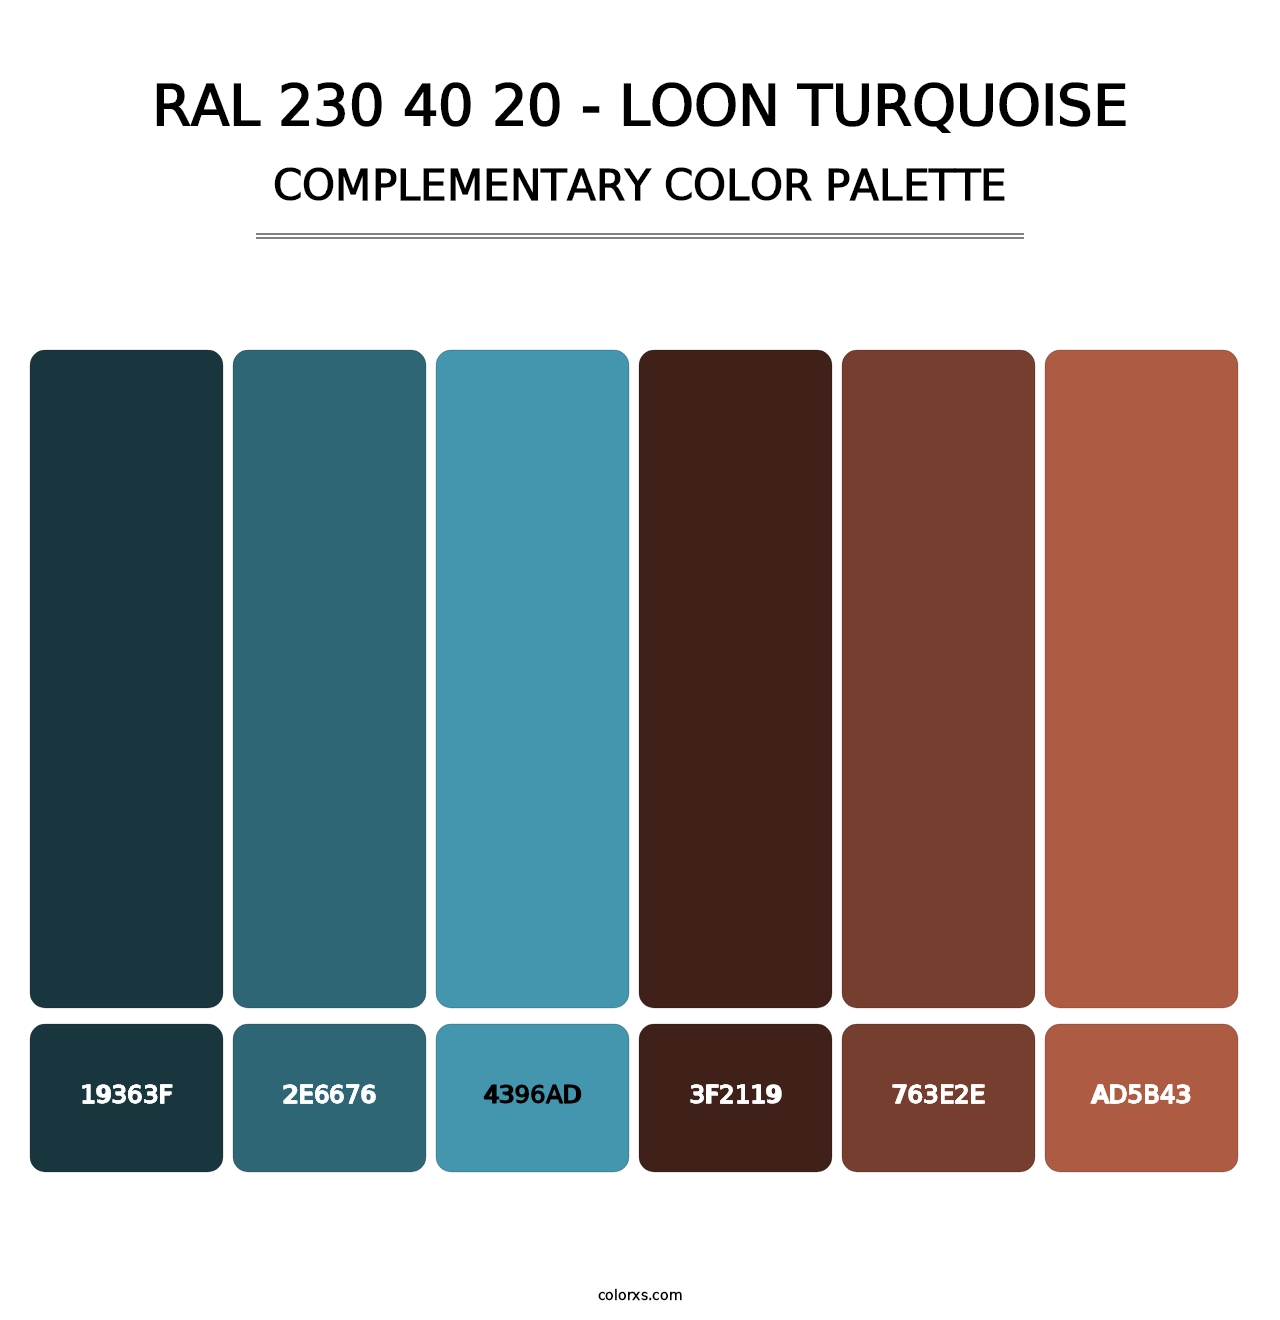 RAL 230 40 20 - Loon Turquoise - Complementary Color Palette